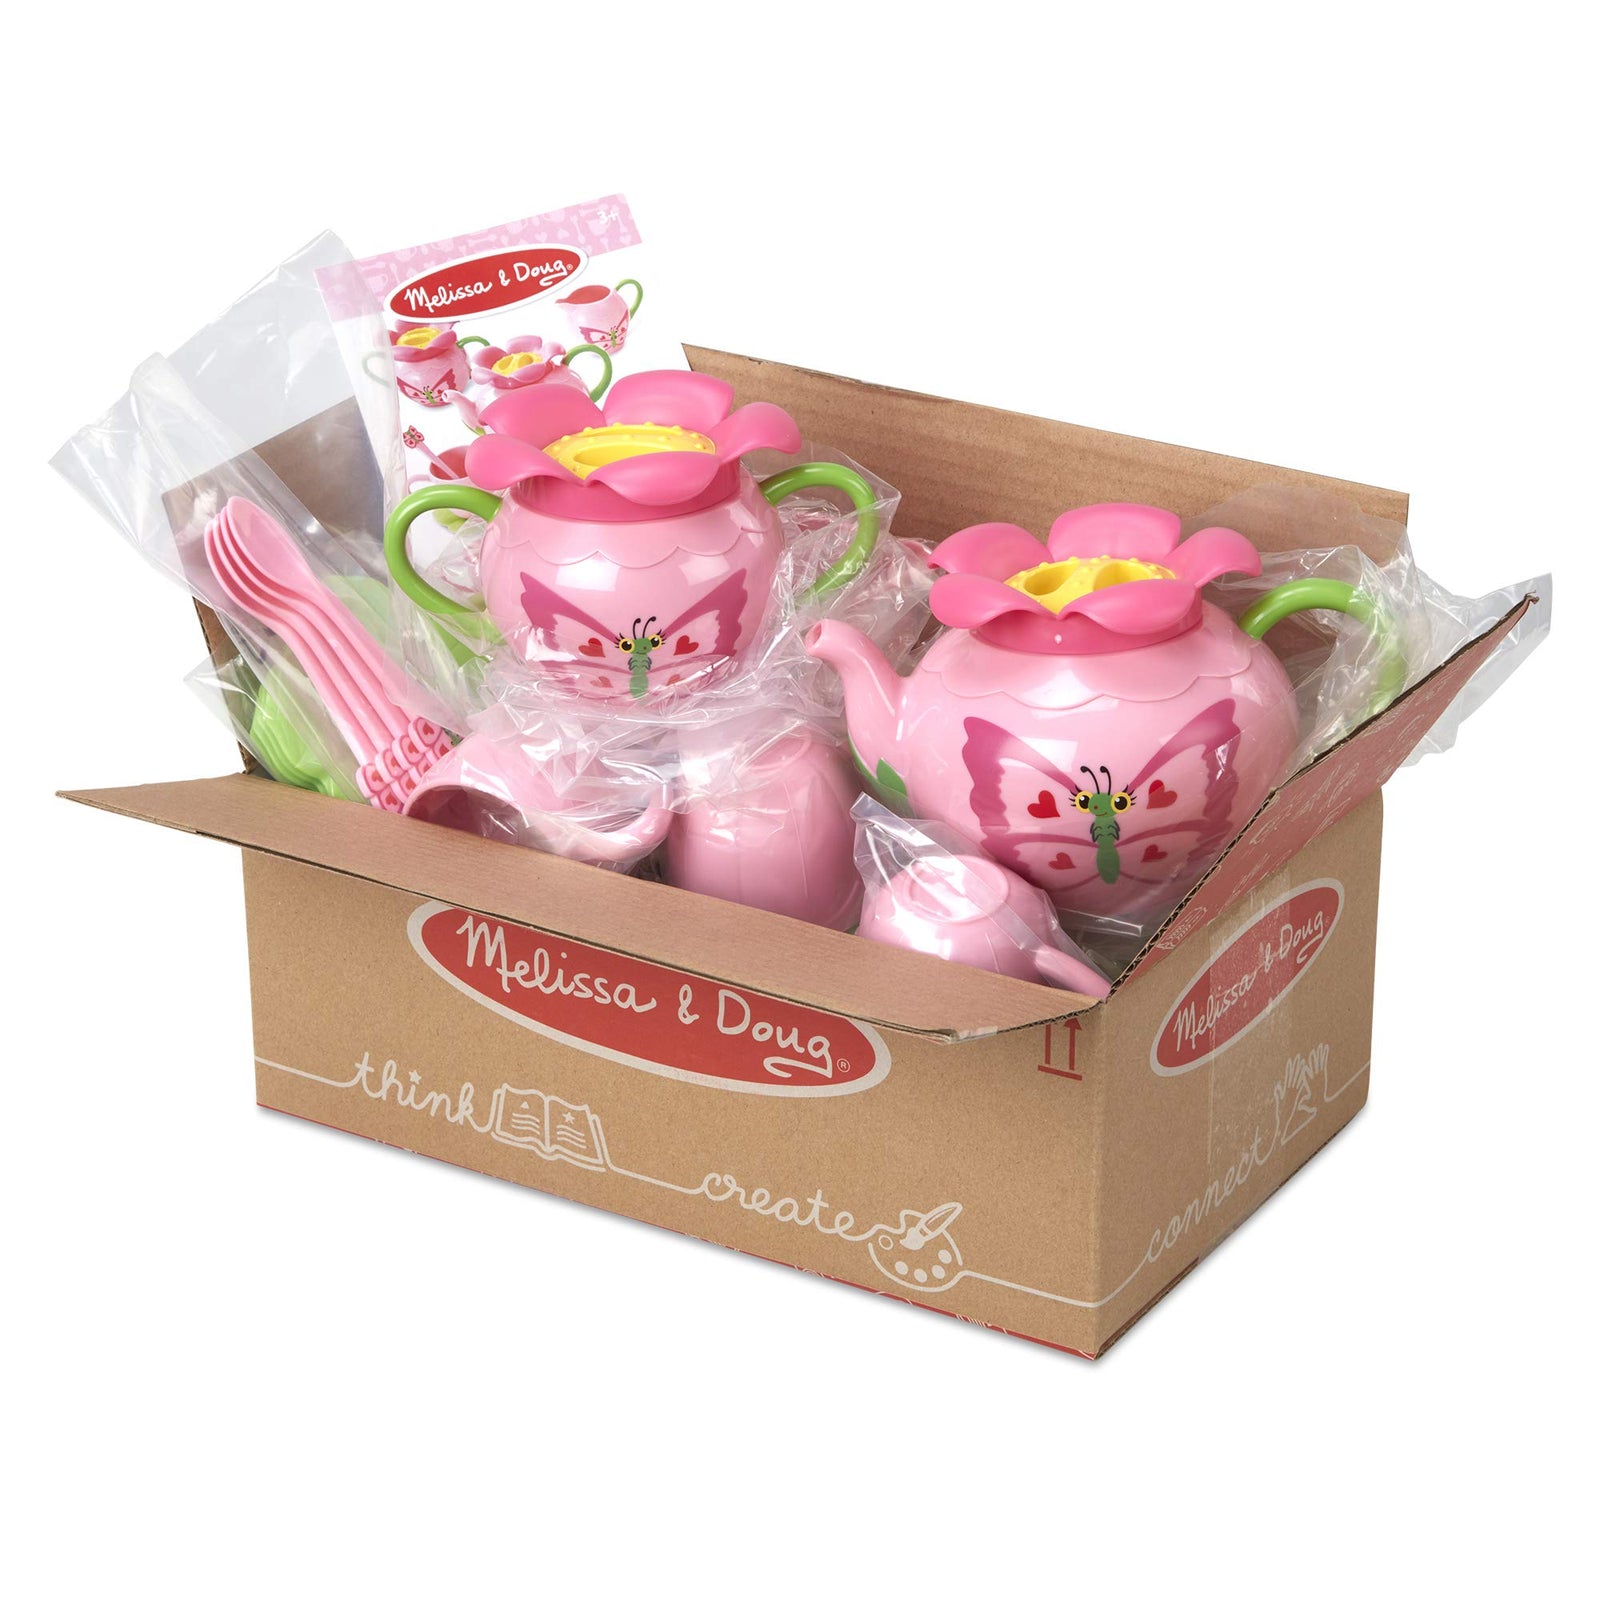 Melissa & Doug Bella Butterfly Pretend Play Tea Set (Pretend Play, Food-Safe Material, BPA-Free, Durable Construction, Frustration-Free Packaging)